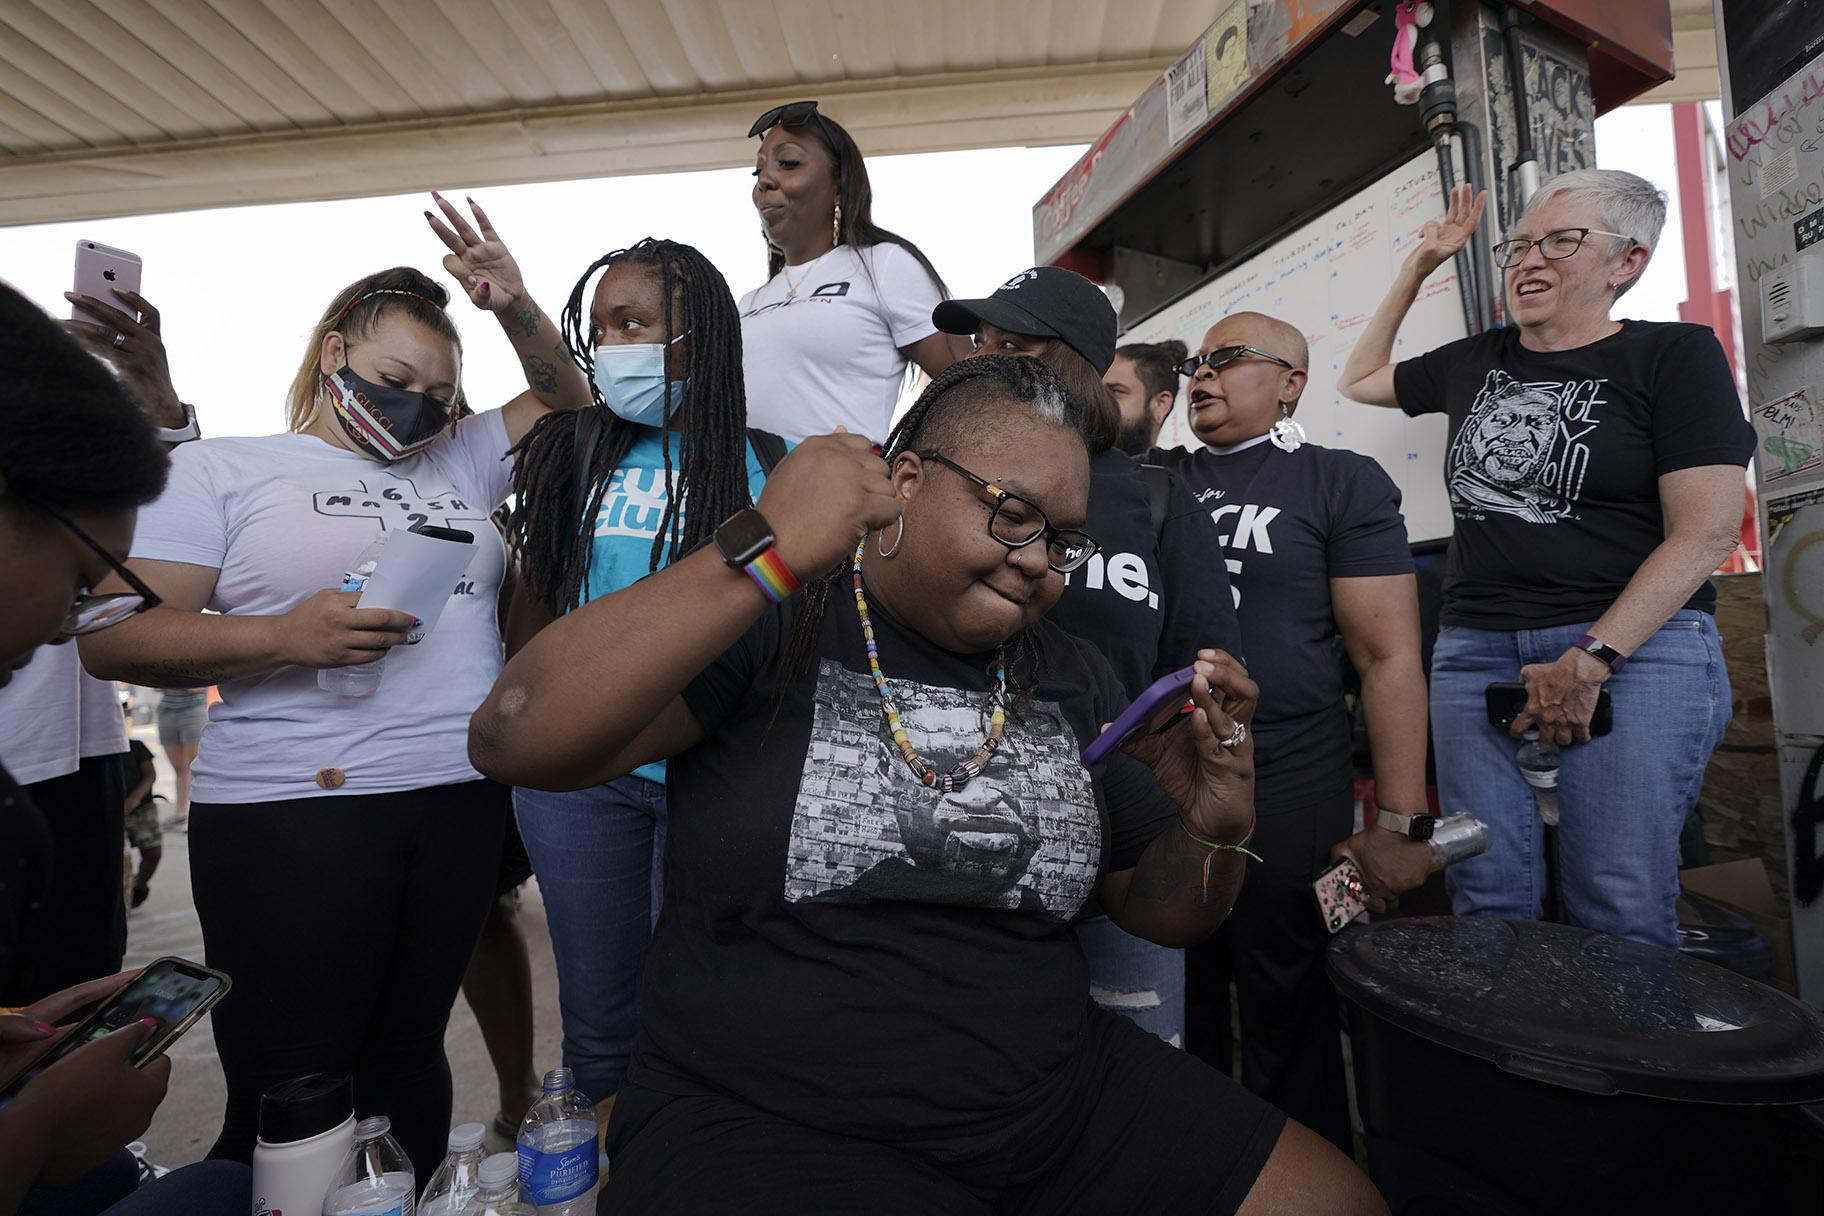 Jennifer Starr Dodd, center, and other supporters react to the sentencing of former Minneapolis police Officer Derek Chauvin for the murder of George Floyd, Friday, June 25, 2021, at George Floyd Square where Floyd was killed, in Minneapolis. Chauvin was sentenced to 22 1/2 years in prison. (AP Photo / Julio Cortez)